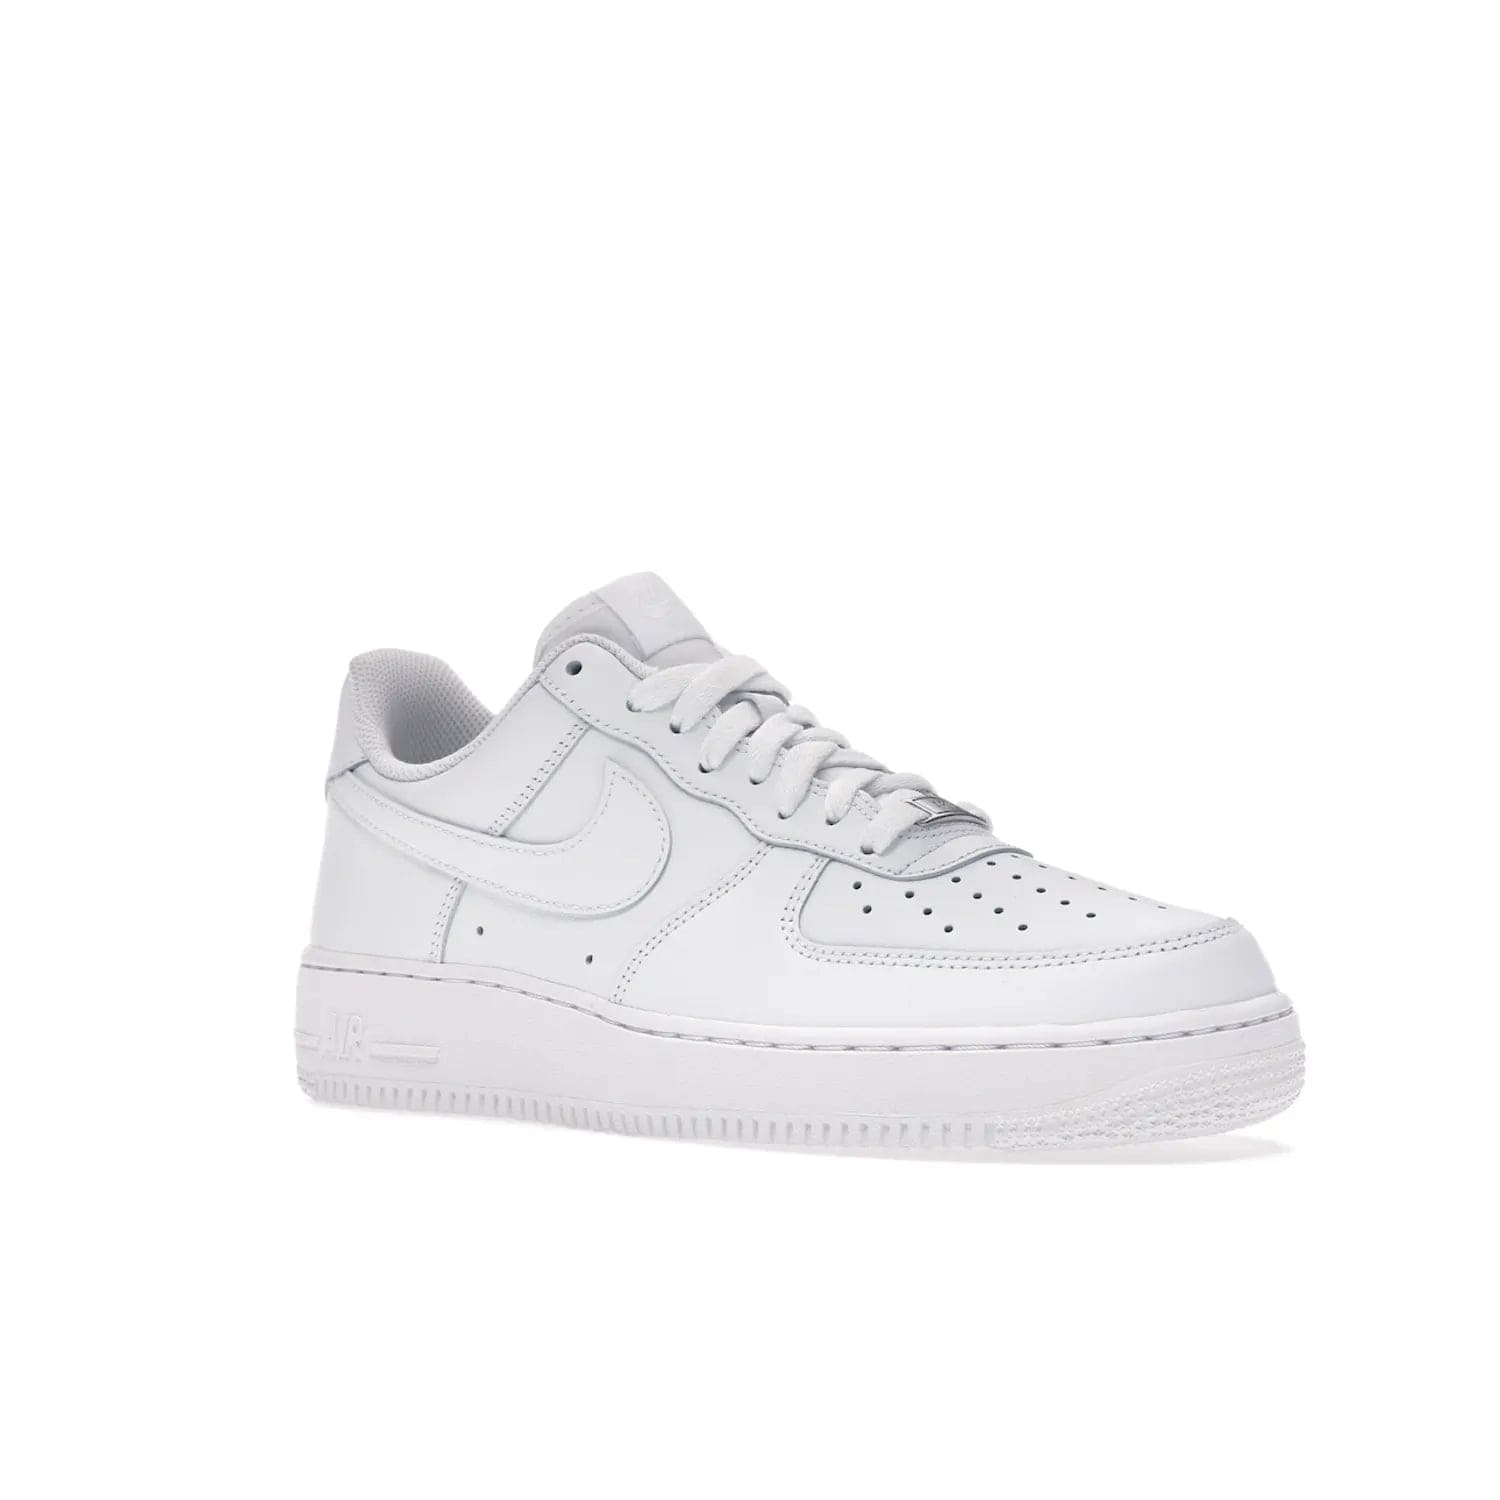 Nike Air Force 1 Low '07 White - Image 5 - Only at www.BallersClubKickz.com - ##
Iconic Swoosh overlays and crisp white sole make the classic Nike Air Force 1 Low White '07 an essential colorway. Classic for seasoned heads and new fans alike.